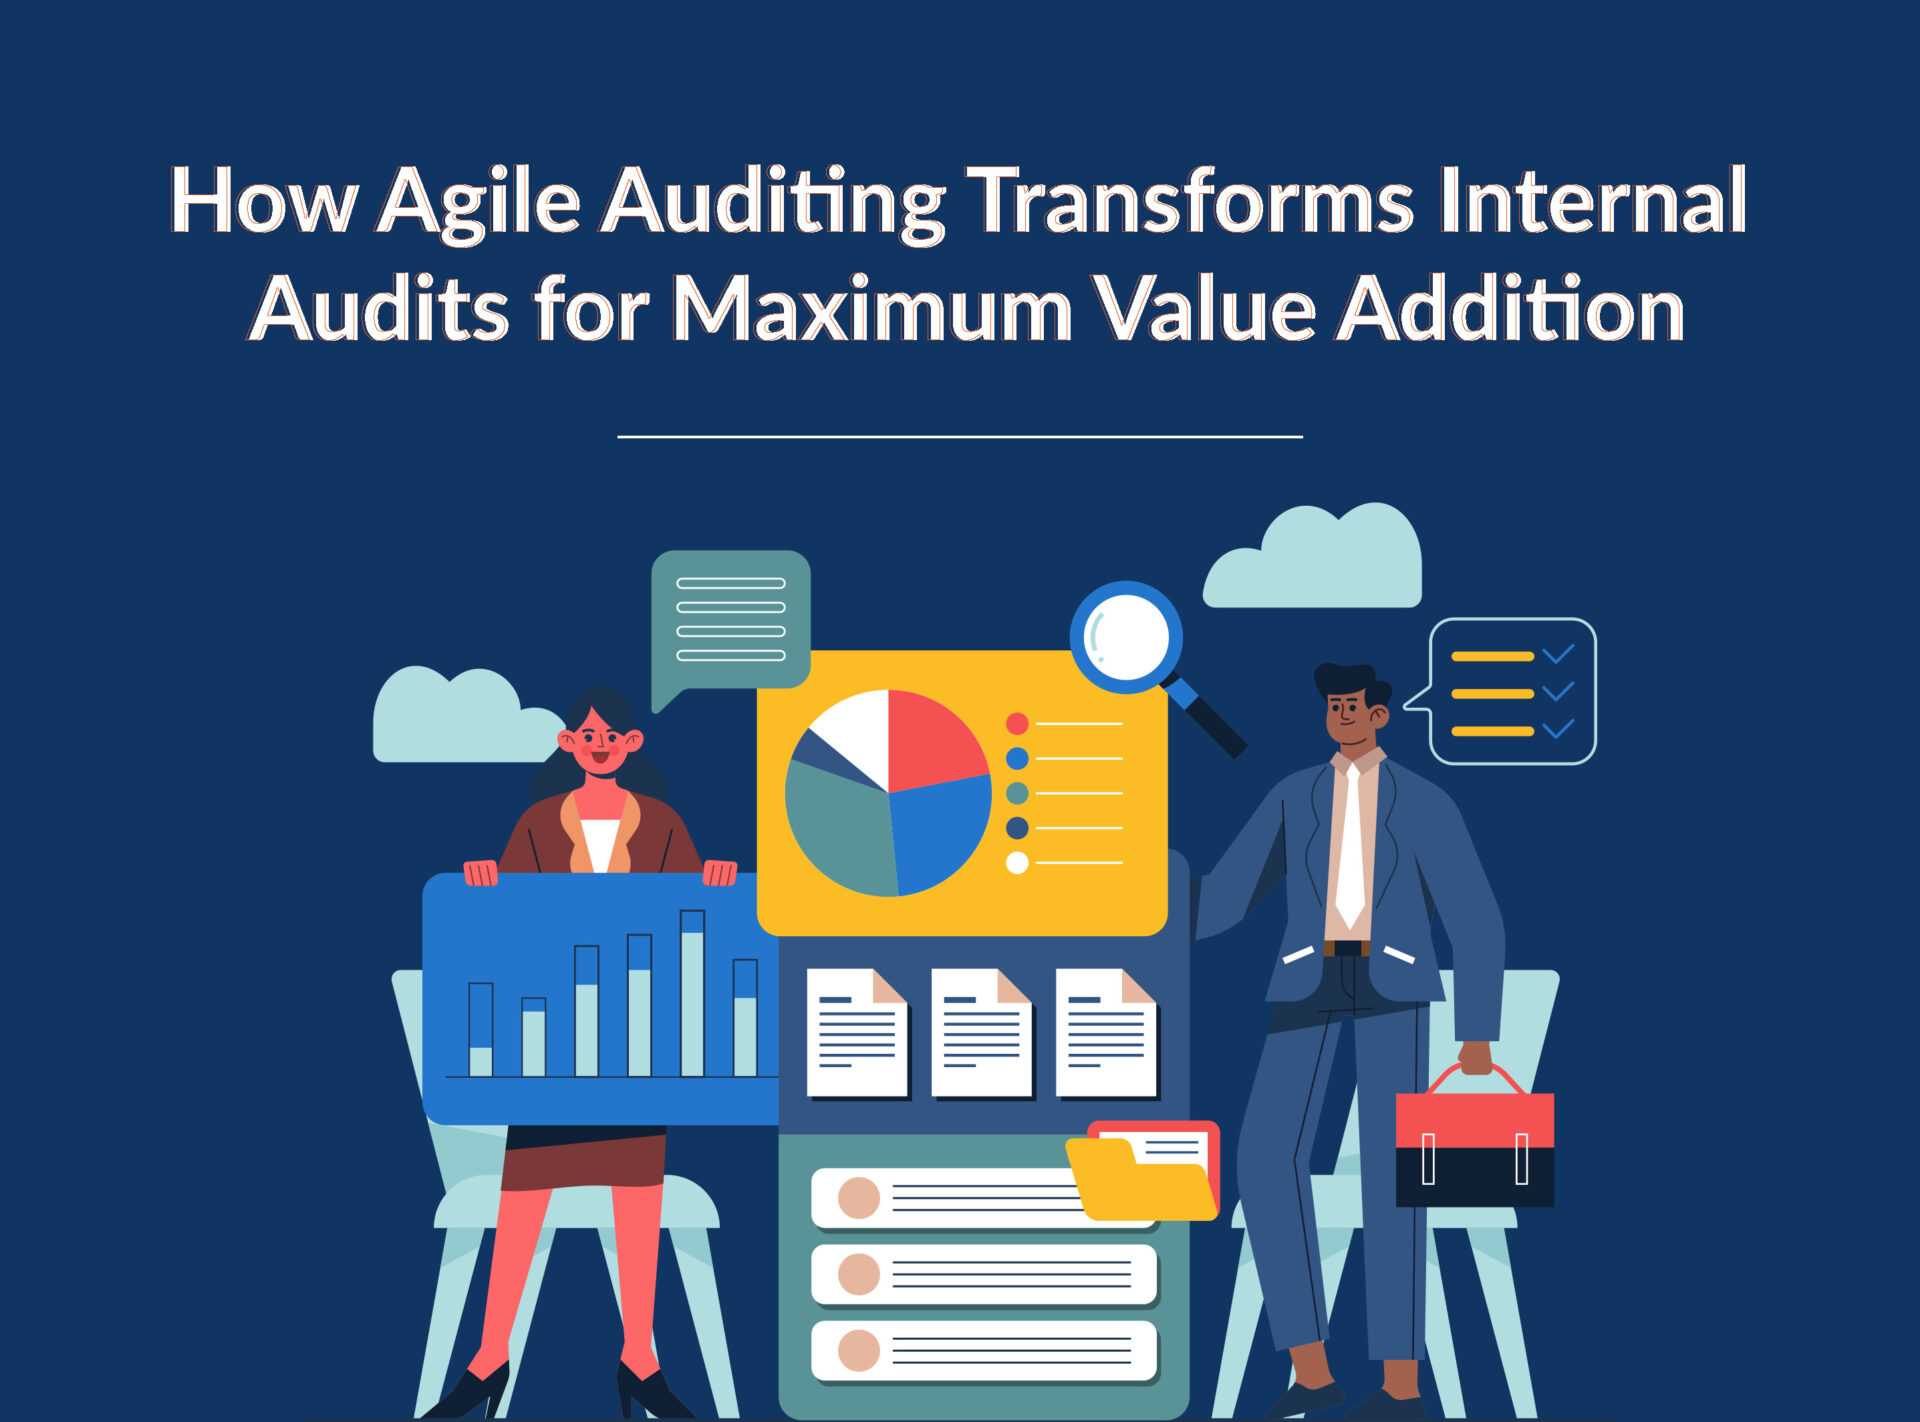 How Agile Auditing Transforms Internal Audits for Maximum Value Addition